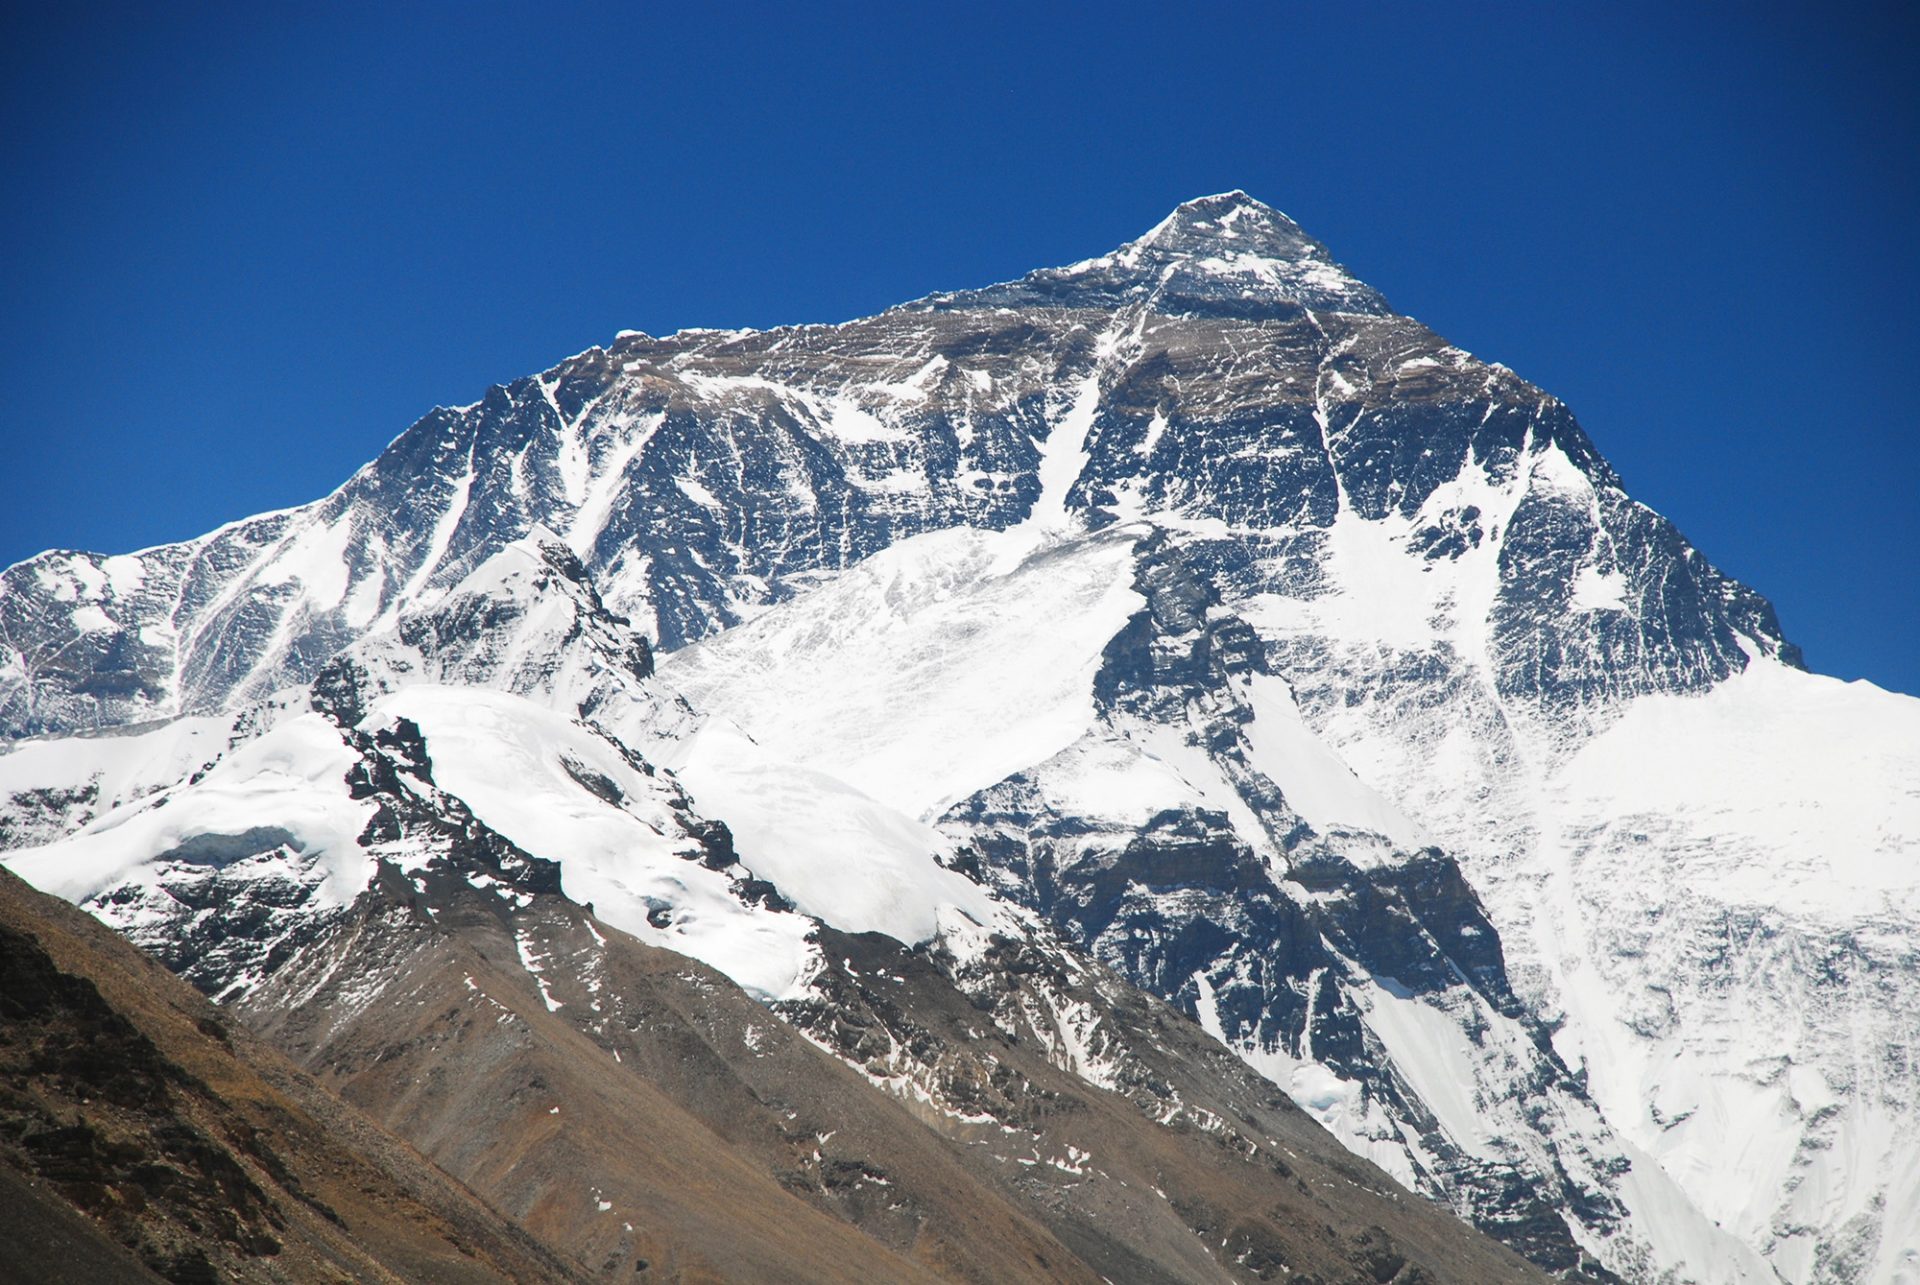 Trek to Everest – Your Own Experience of the World’s Greatest Mountain